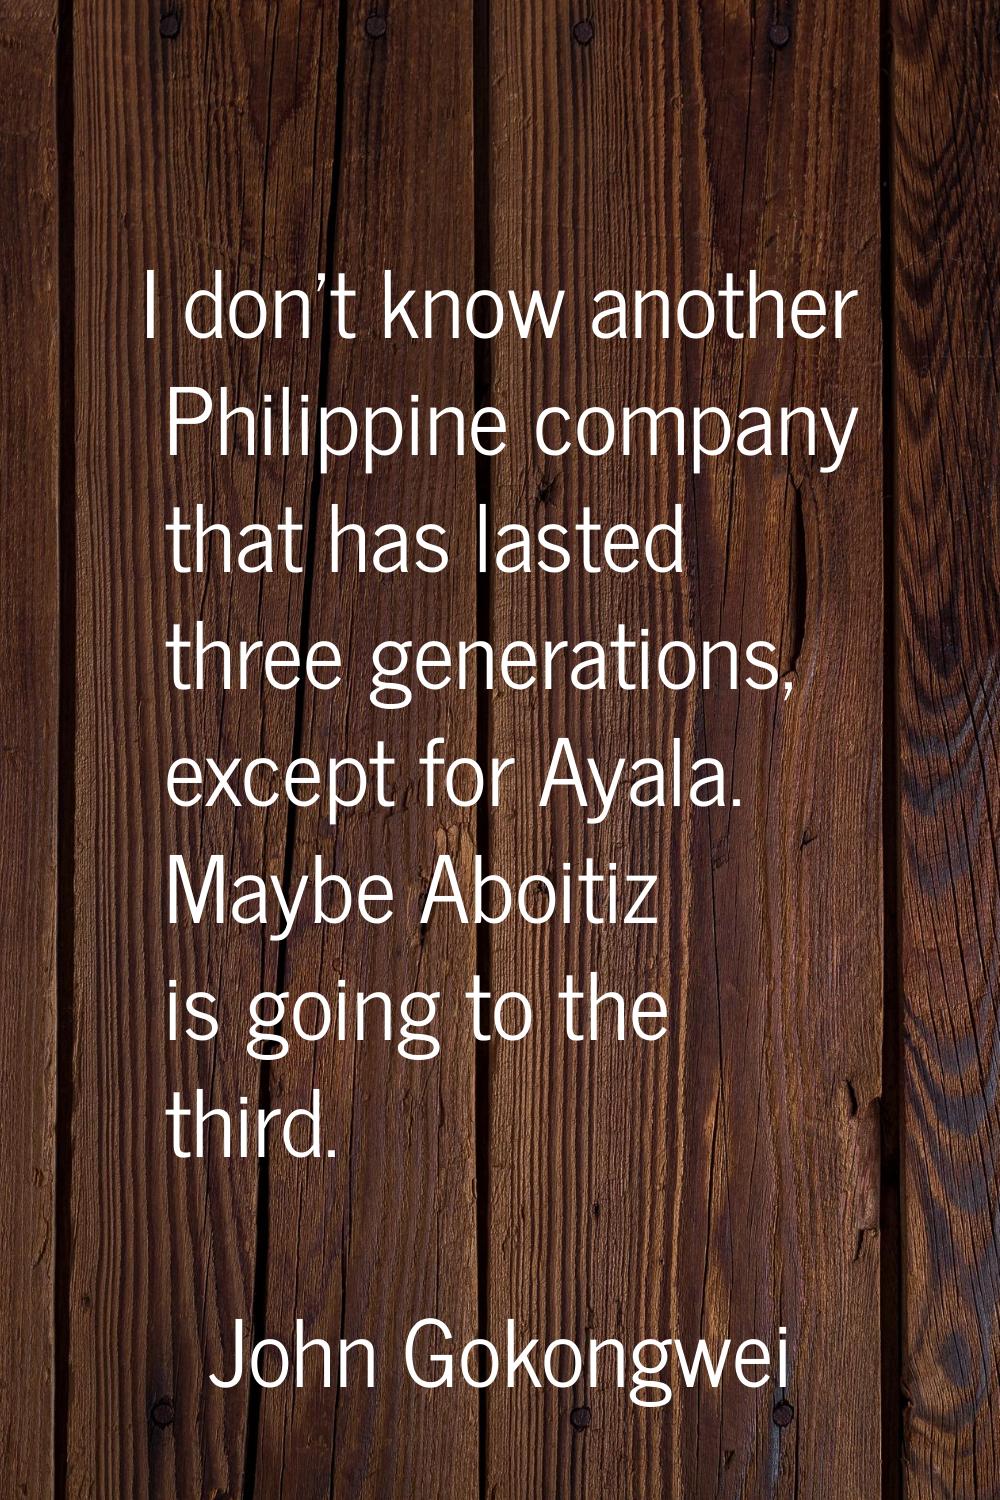 I don't know another Philippine company that has lasted three generations, except for Ayala. Maybe 